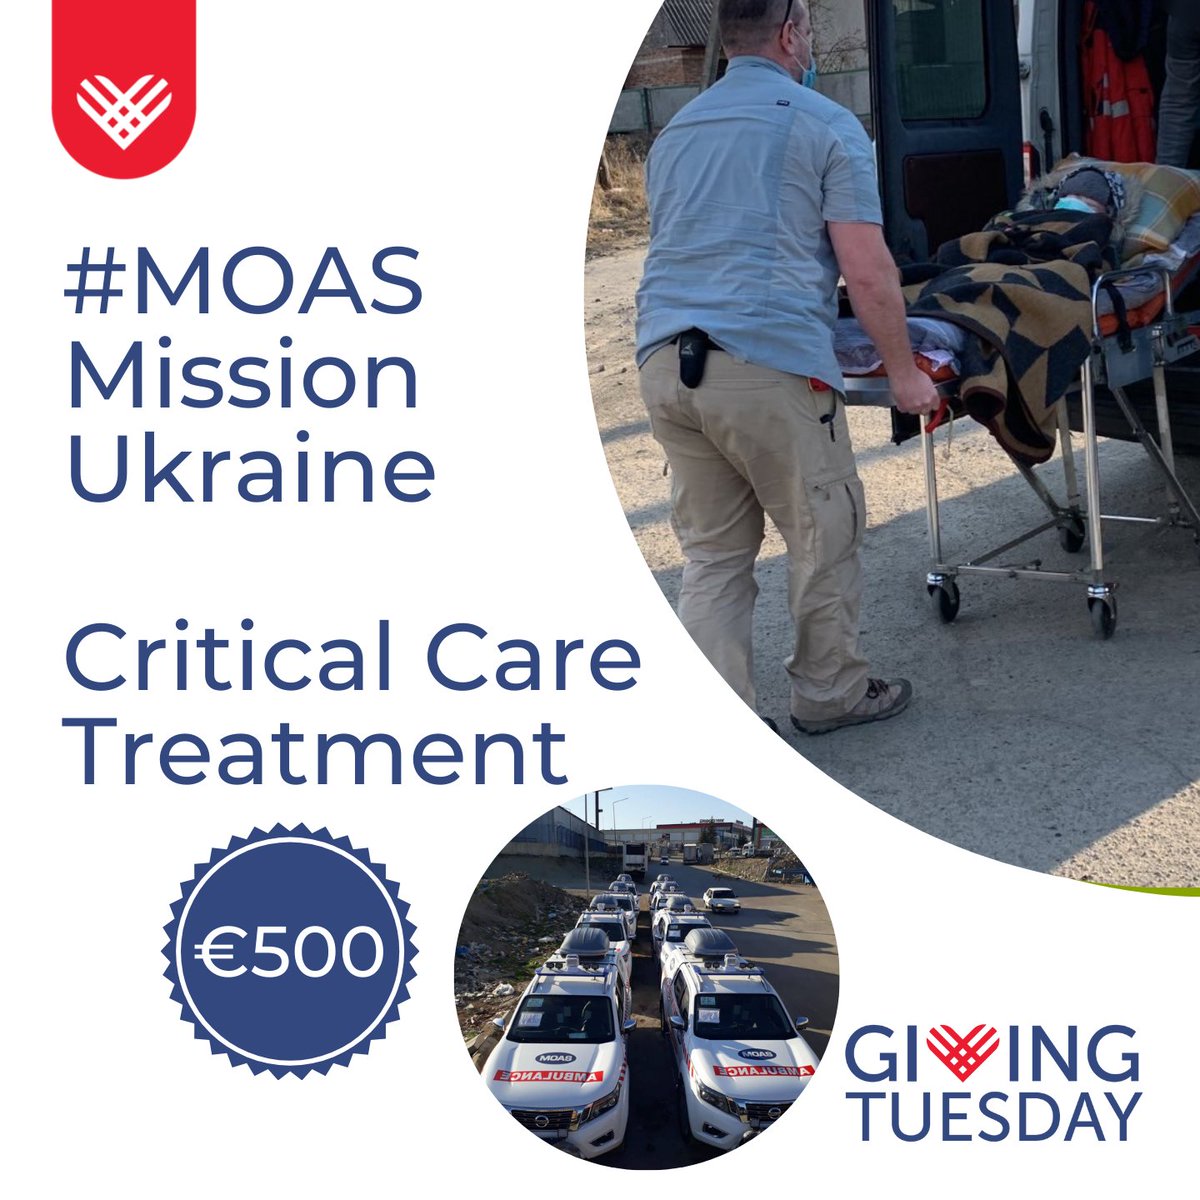 As the conflict in #Ukraine continues to bring devastation and suffering, #MOAS is on the field providing life-saving front-line medical assistance and health interventions to the people impacted by the violence. 
Support our work, donate today
#GivingTuesday #MOASMissionUkraine